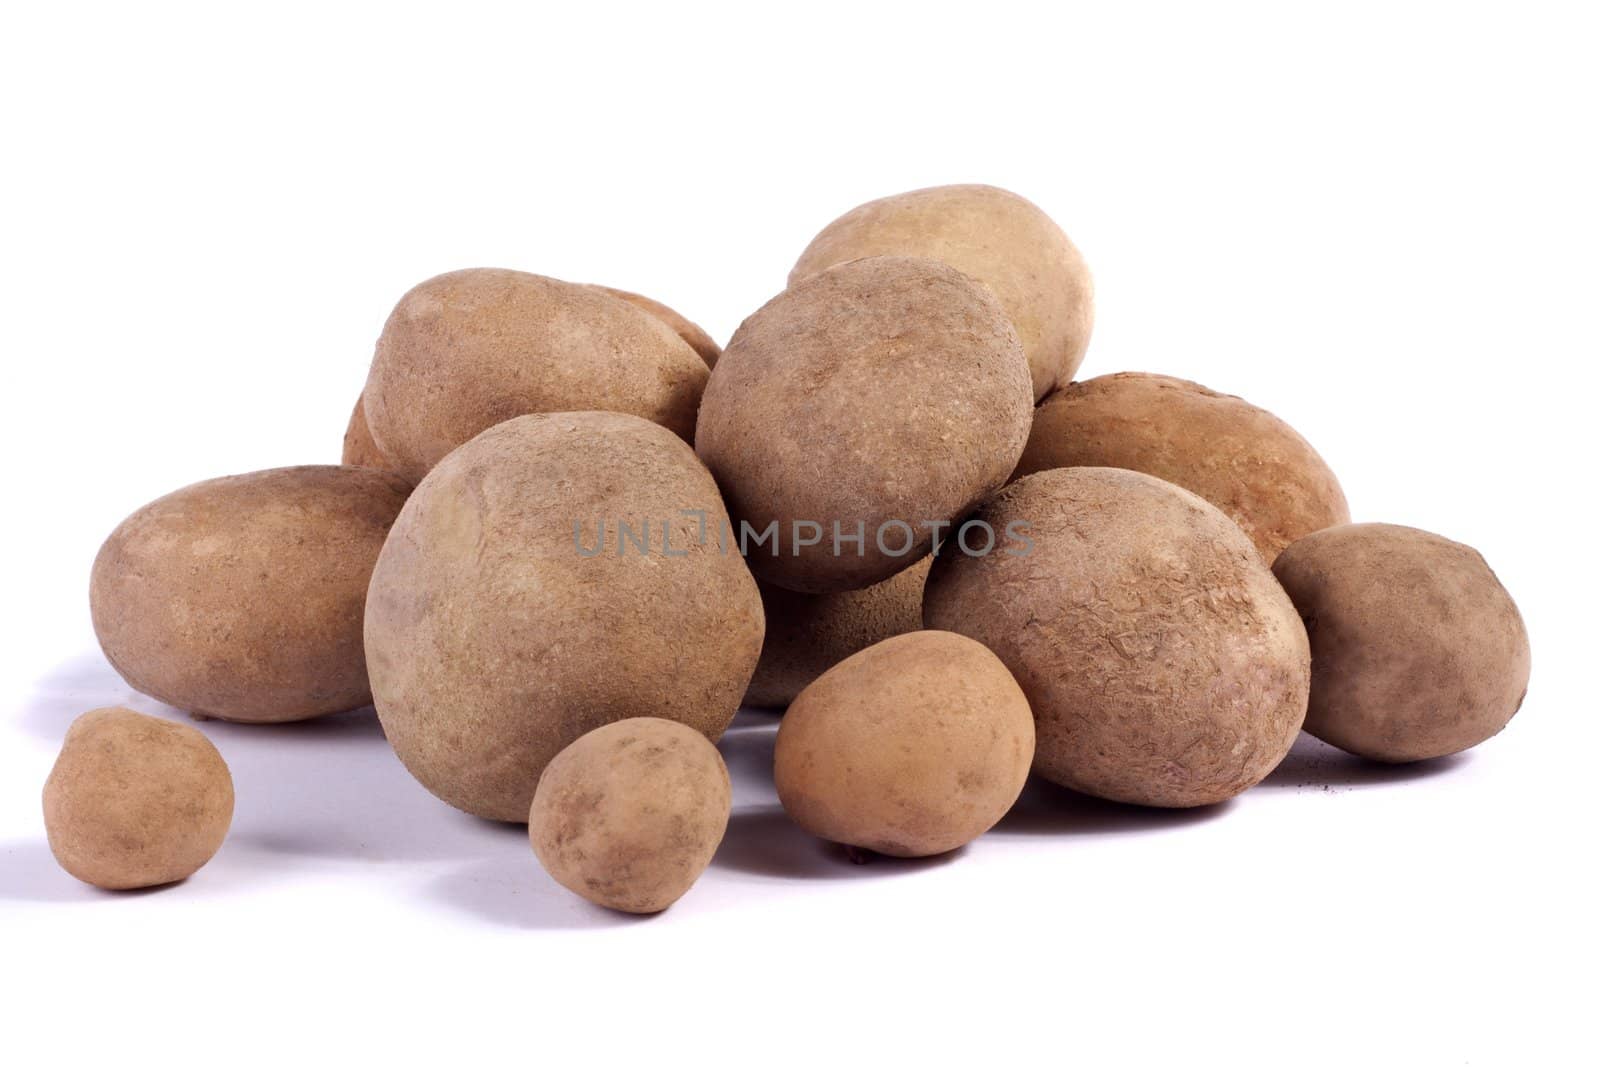 Close up view of some potatoes isolated on a white background.